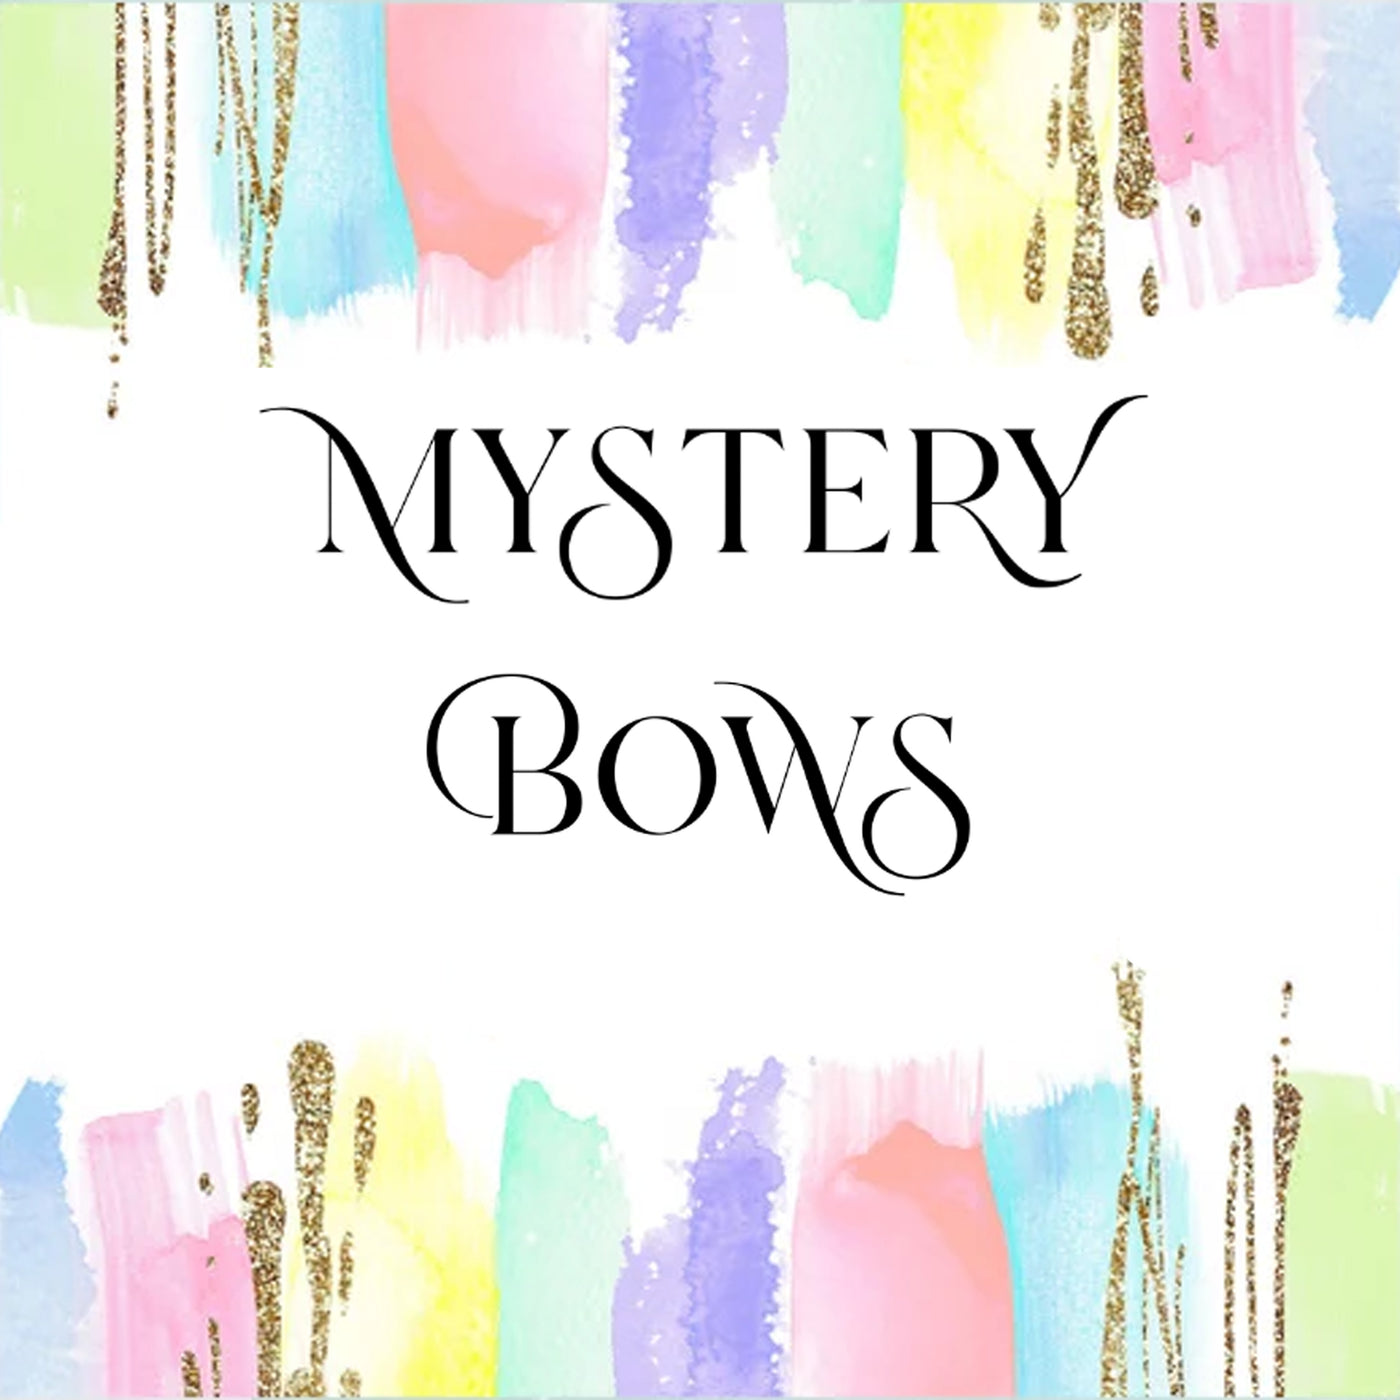 7 Mystery Bows